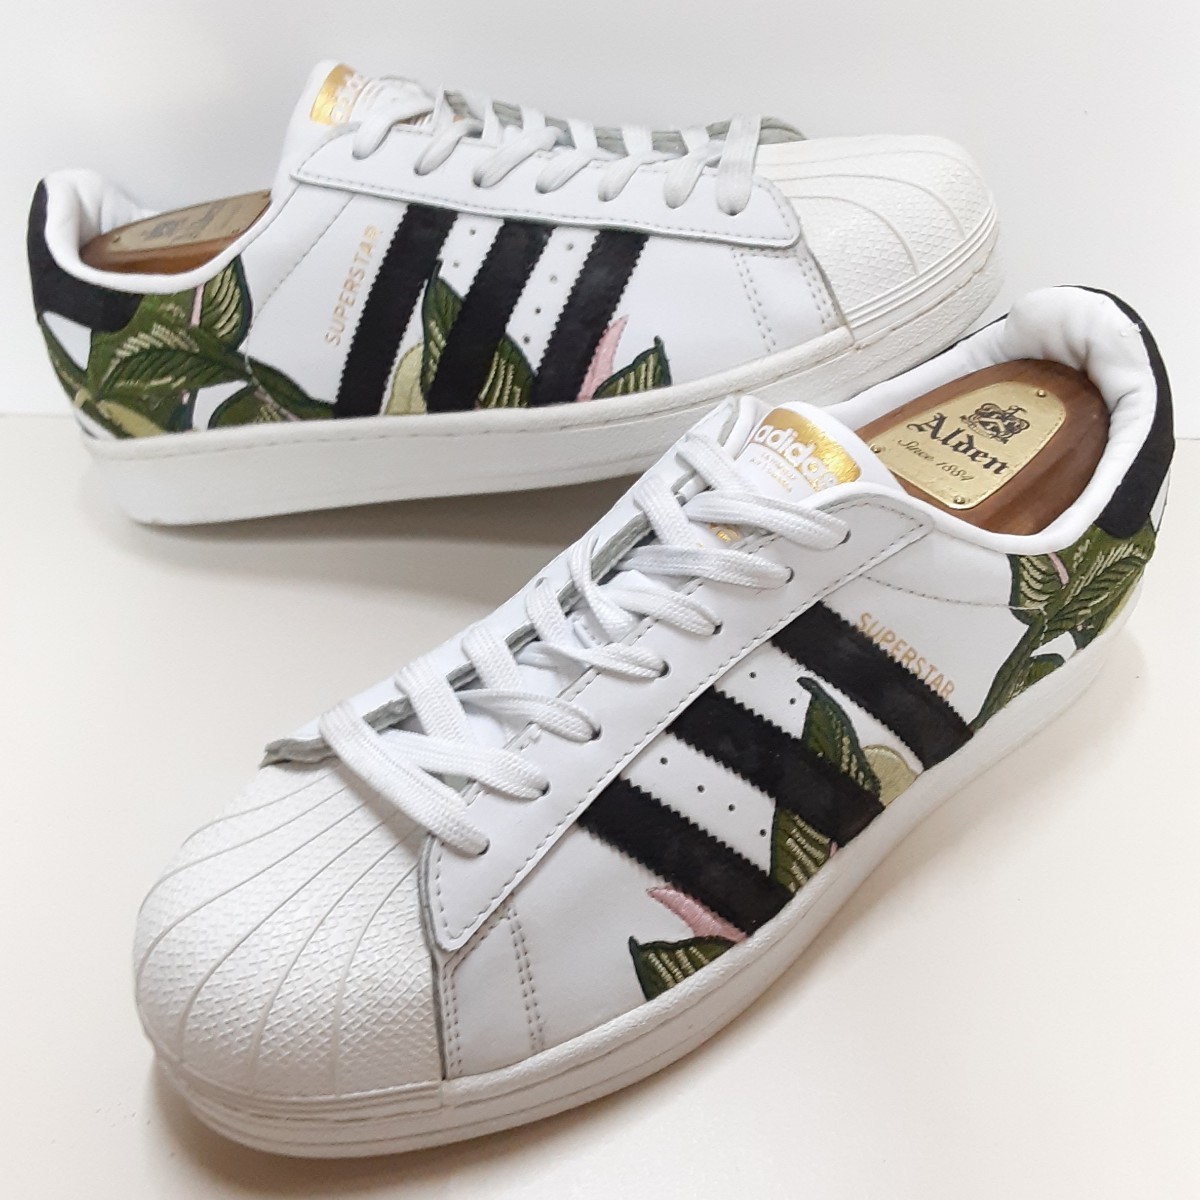  most price! superior article!. work Vintage reissue! masterpiece leaf embroidery! Adidas super Star high class leather sneakers!. road white × black! white plant pattern 26.5